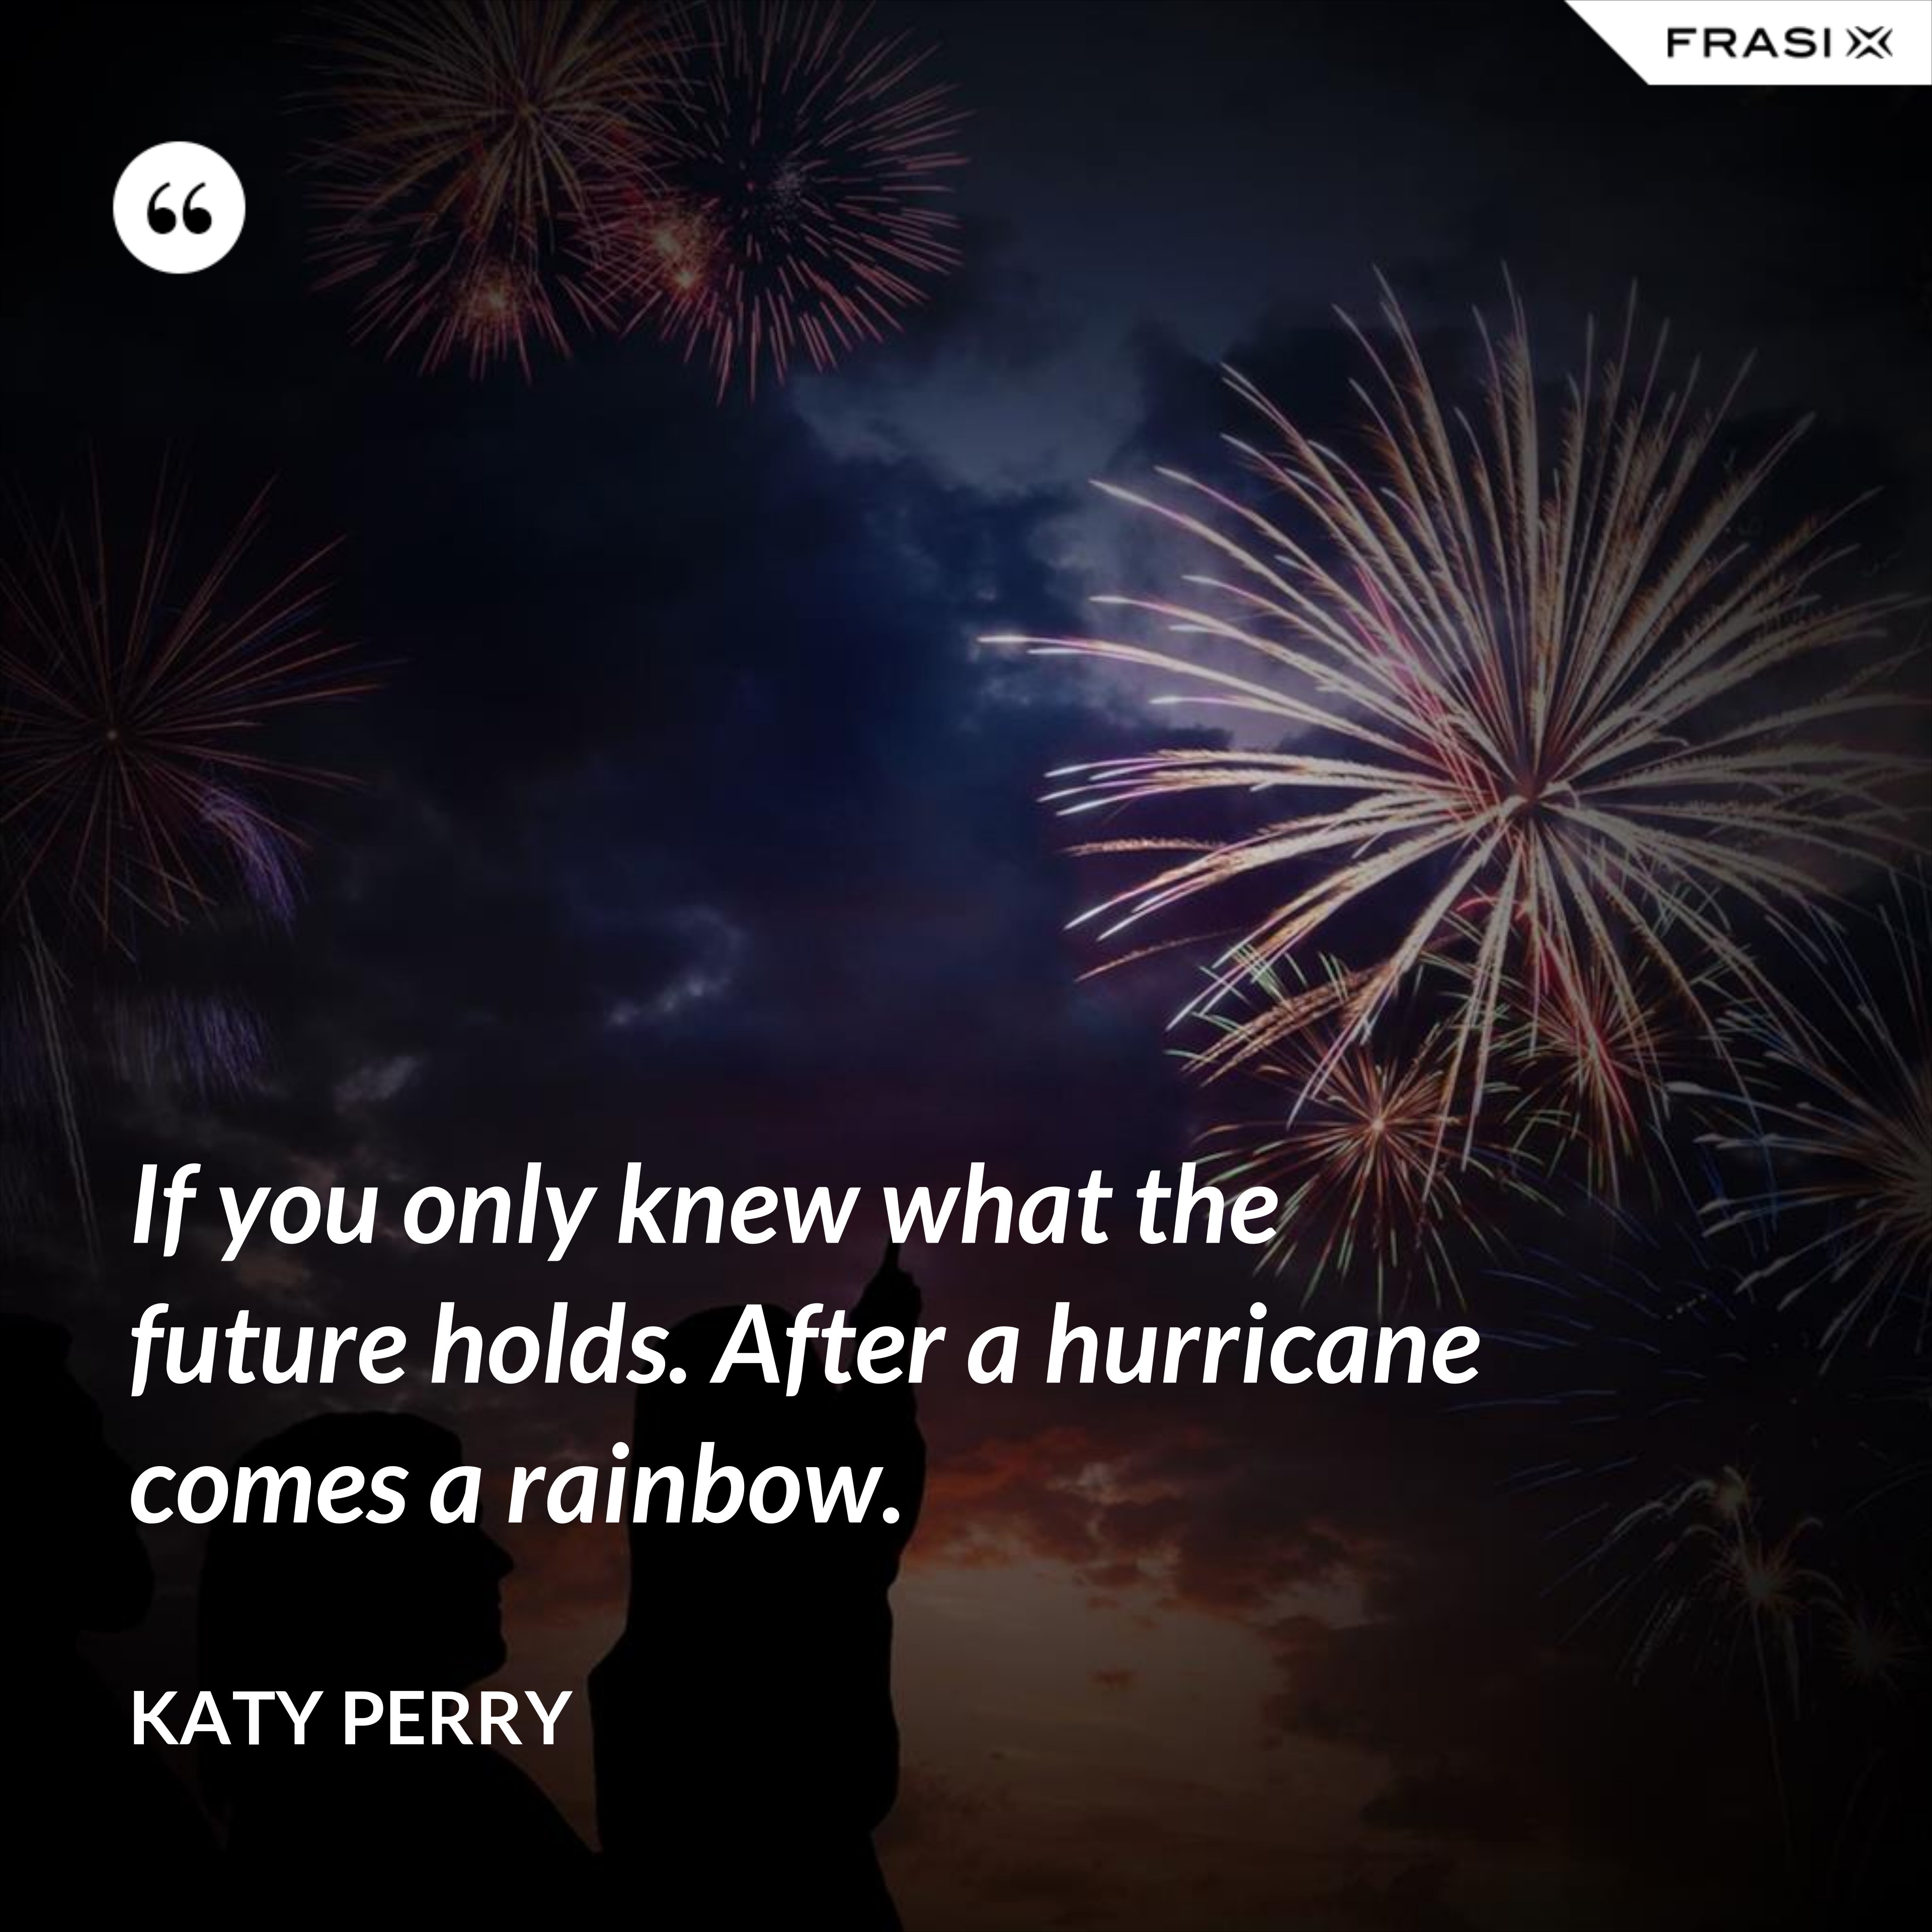 If you only knew what the future holds. After a hurricane comes a rainbow. - Katy Perry